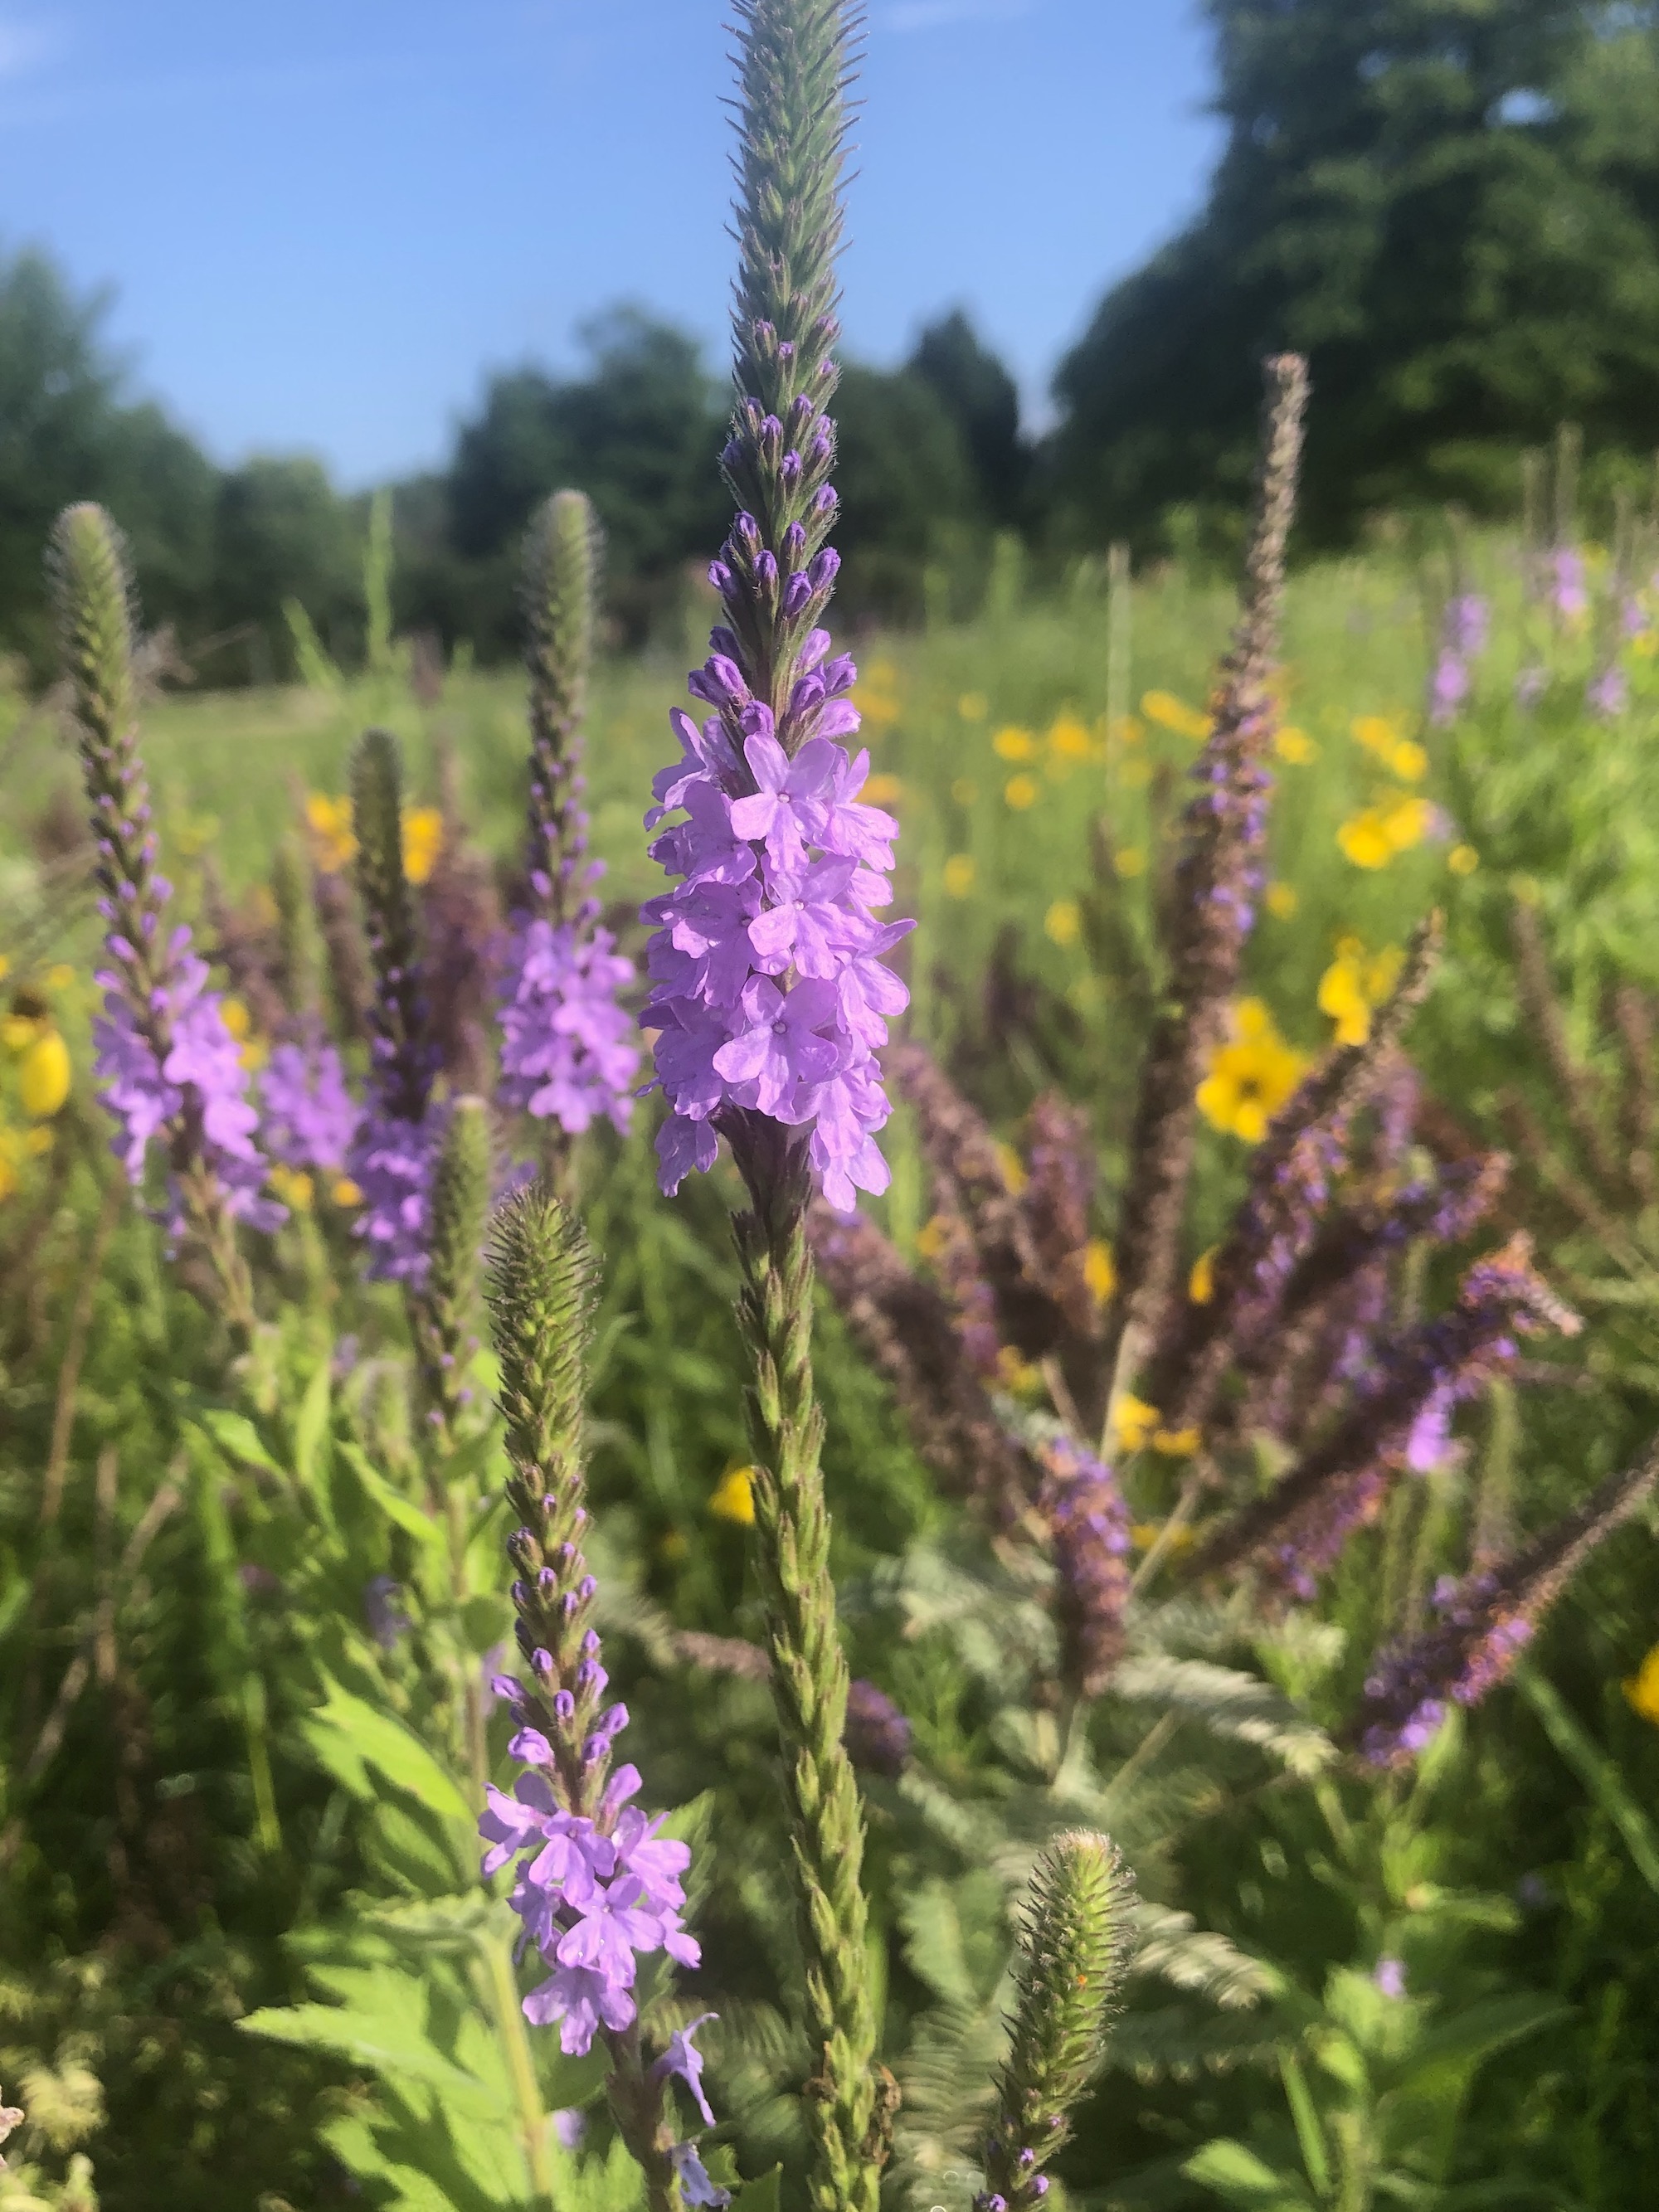  Hoary Vervain next to the UW Arboretum Visitors Center in Madison, Wisconsin on June 30, 2021.